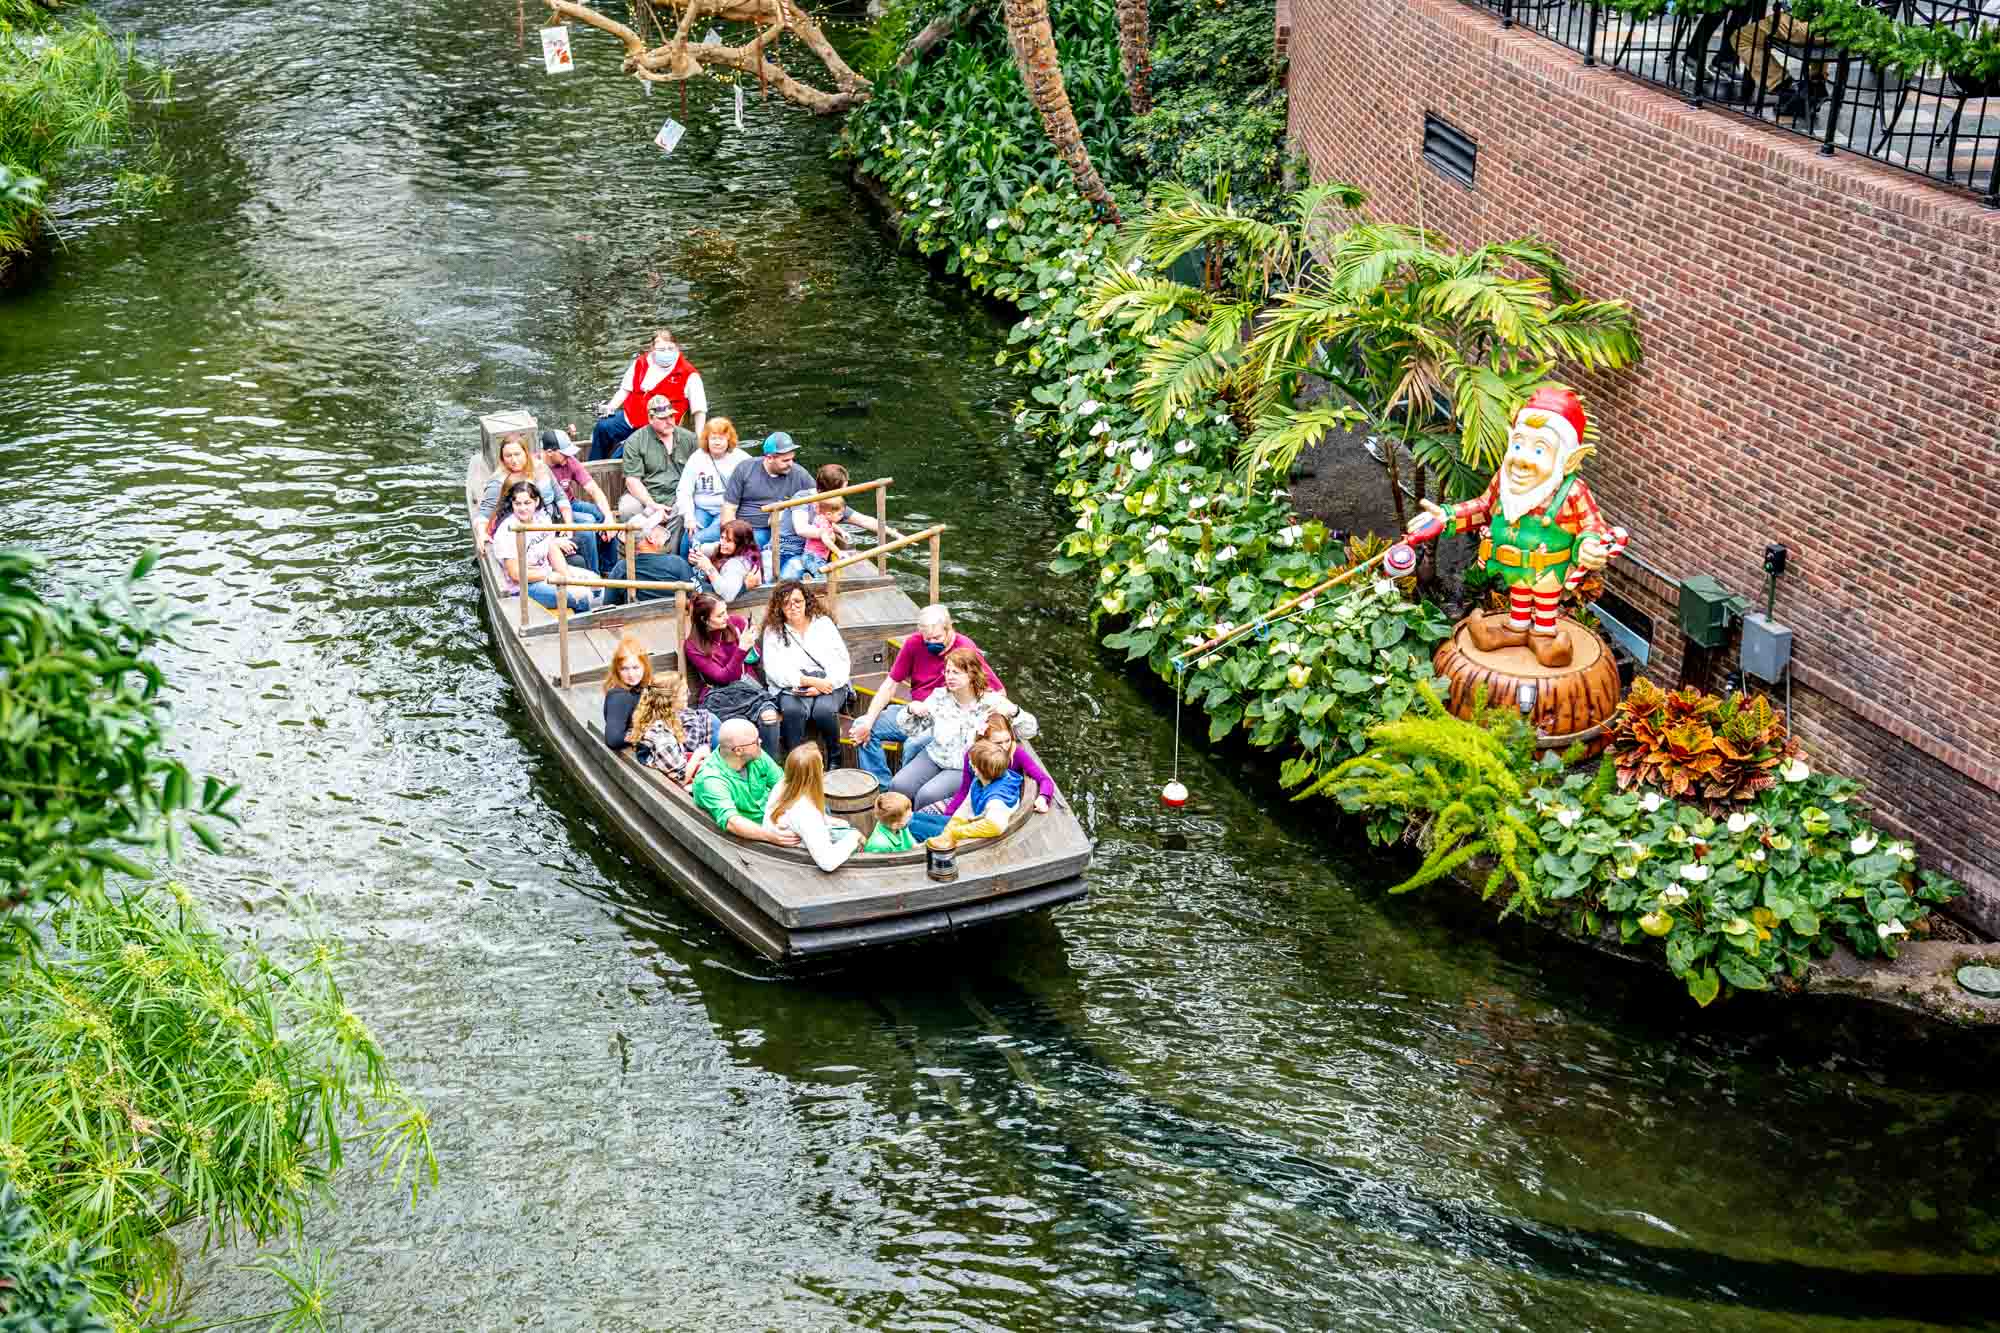 People in a boat cruising on an indoor river at they pass a brick wall.